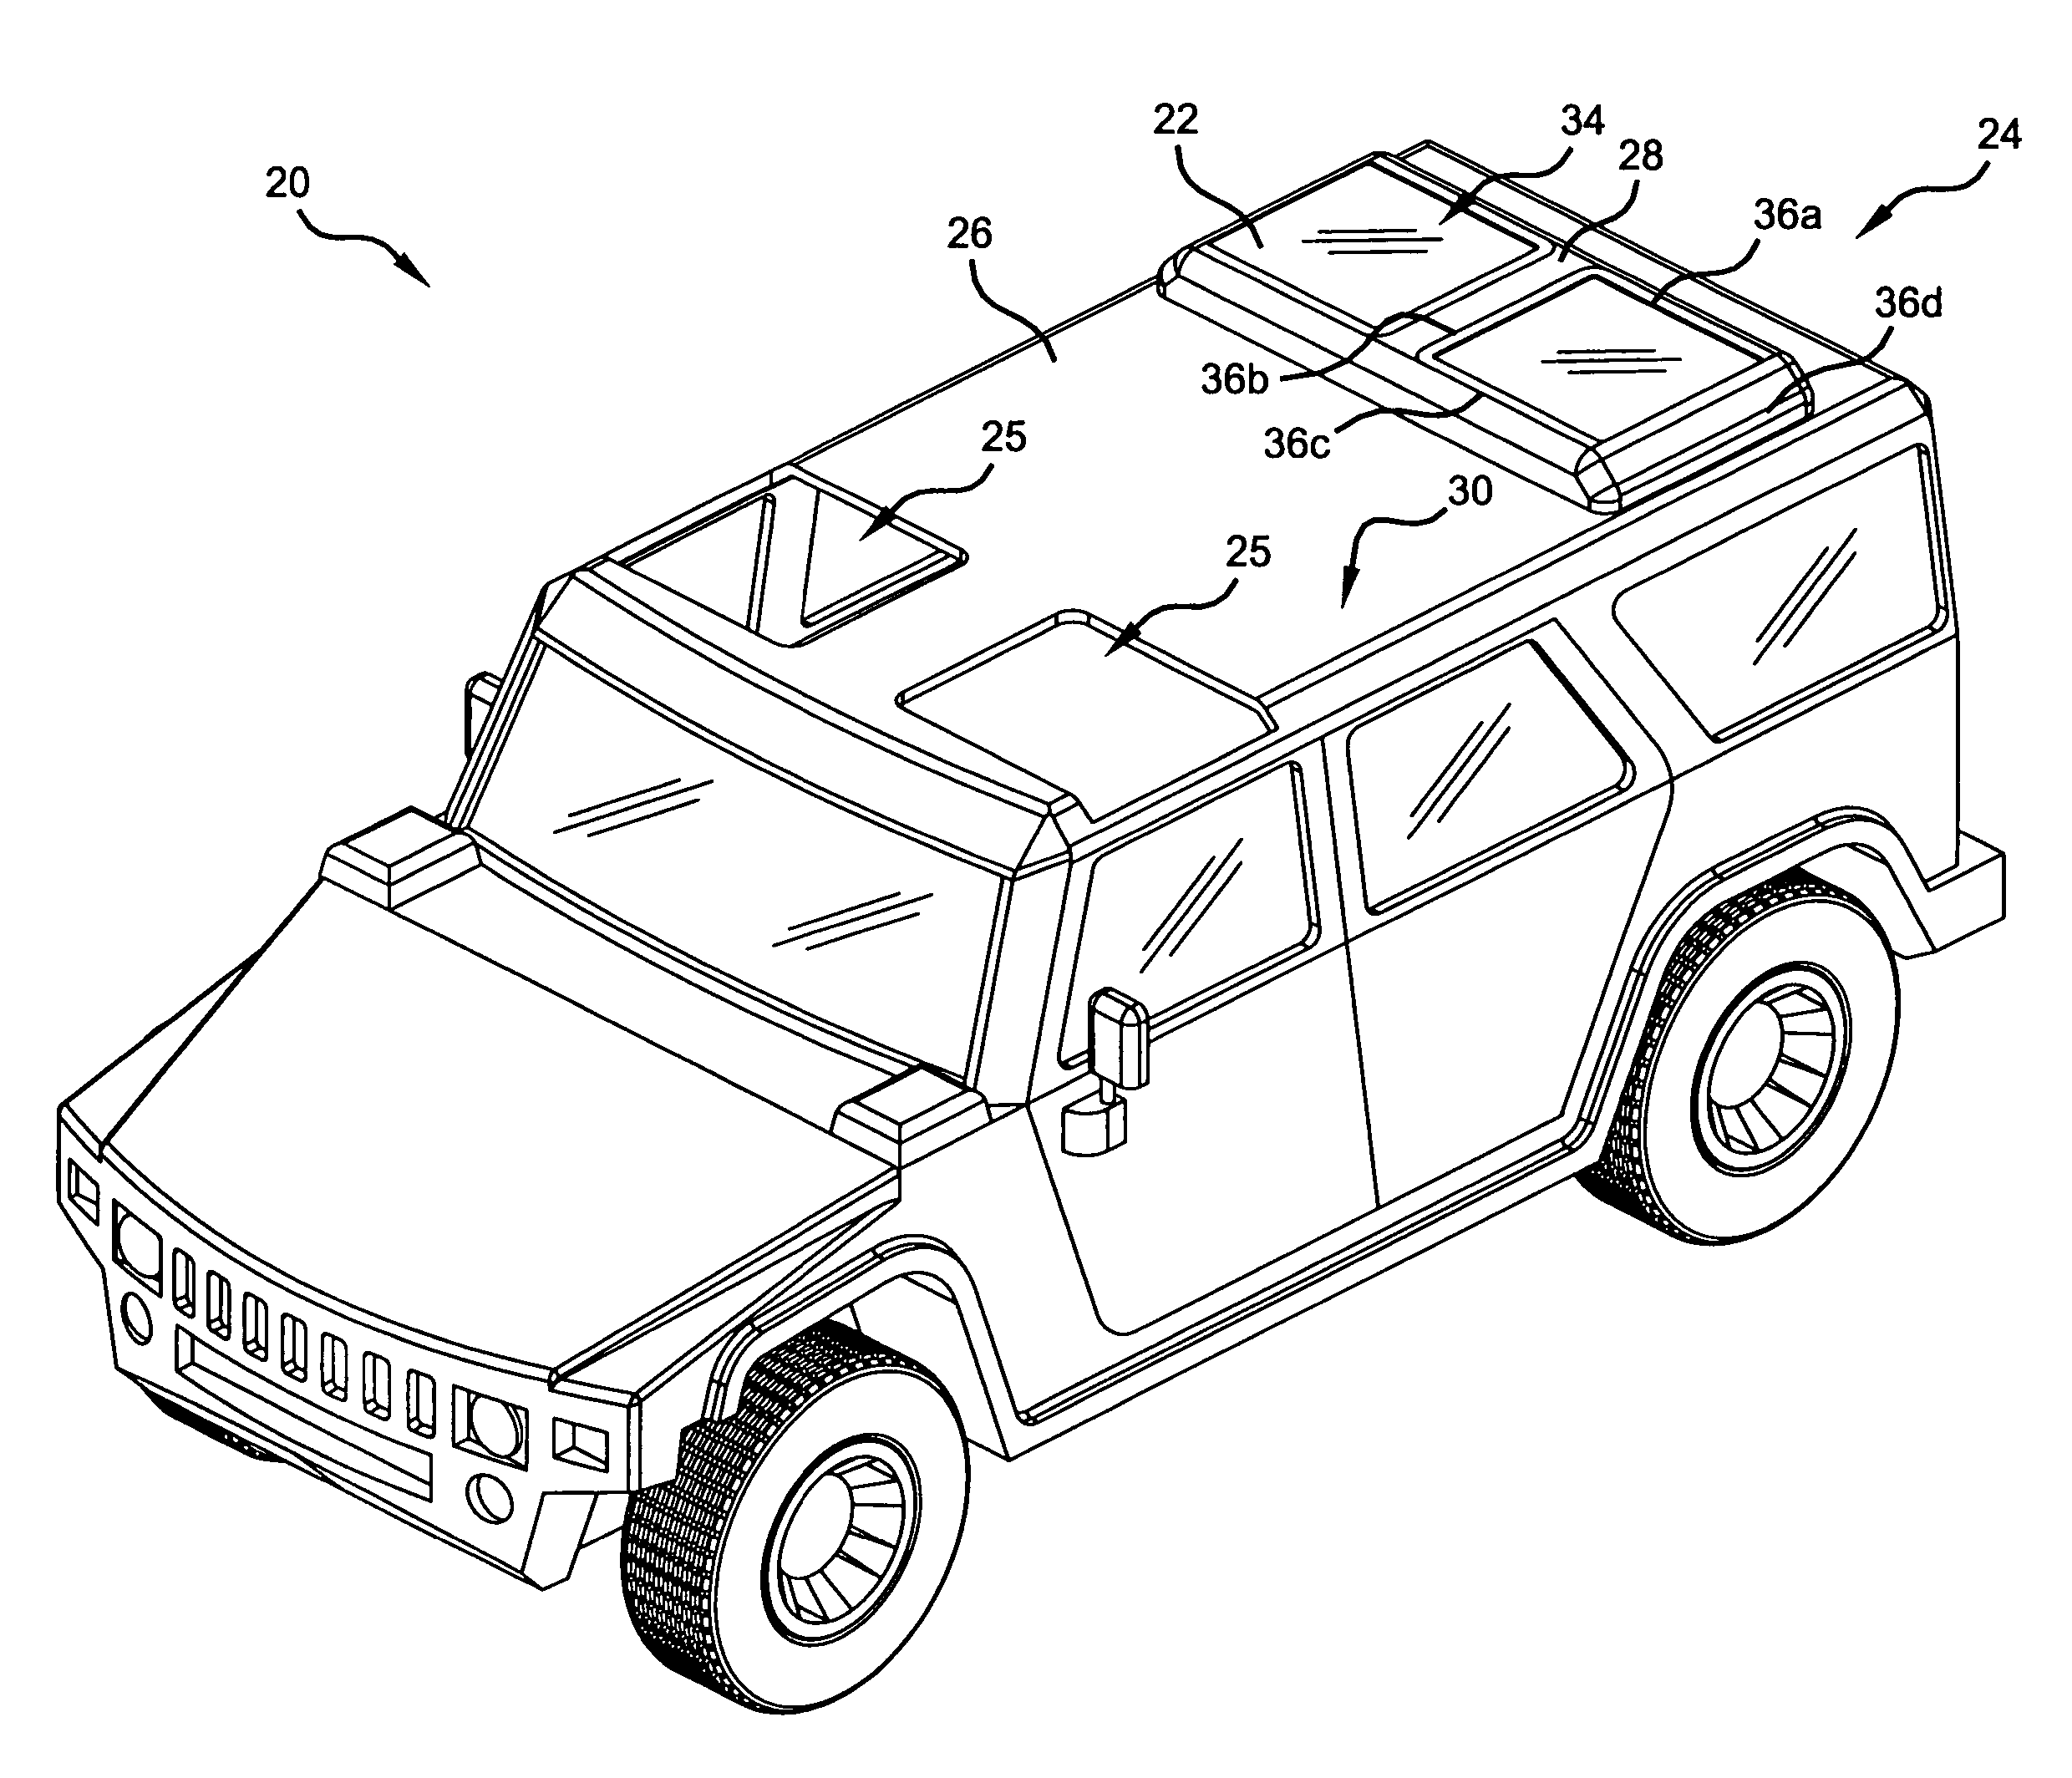 Removable T-top stowage on roof rack